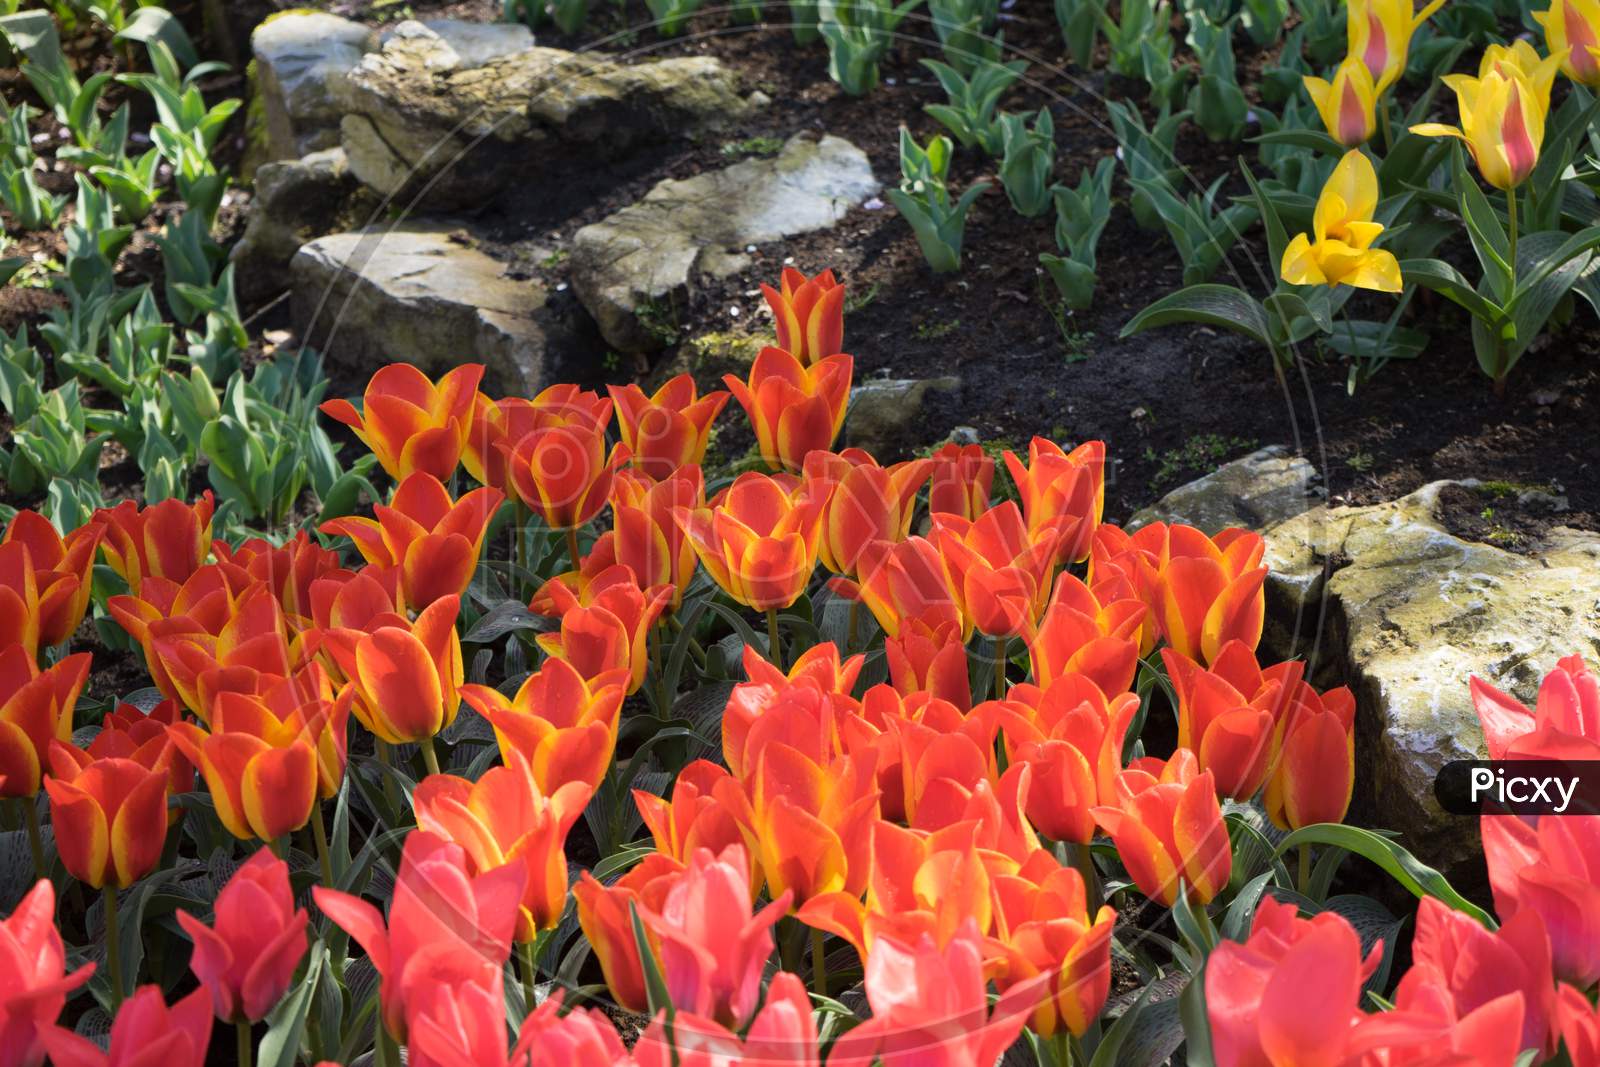 Red And Yellow Tulips In A Garden In Lisse, Netherlands, Europe